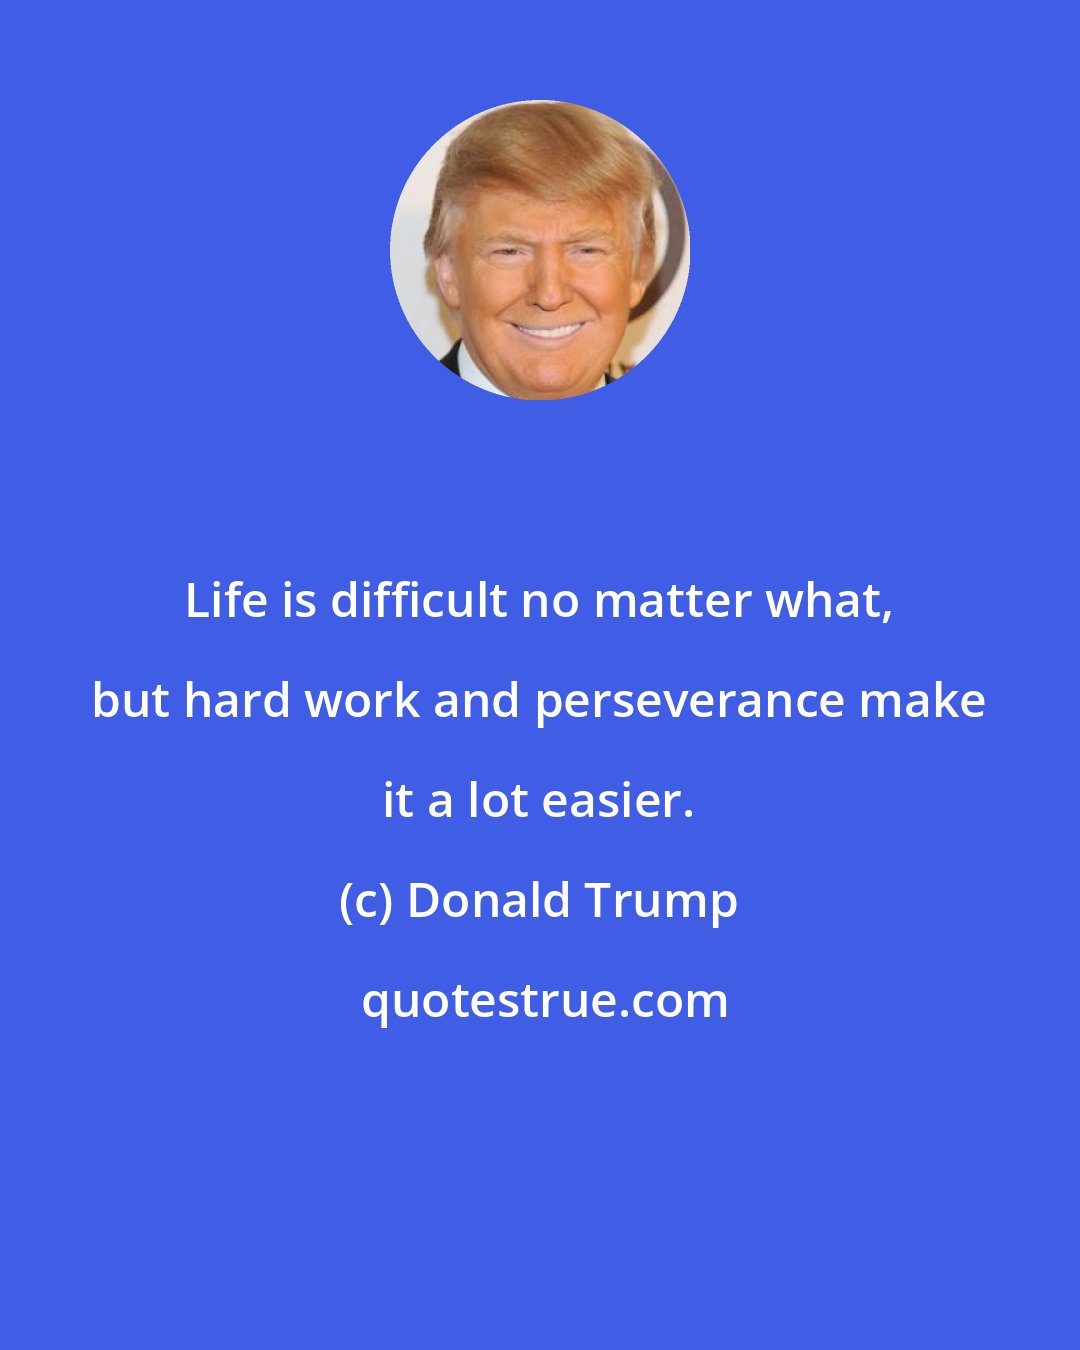 Donald Trump: Life is difficult no matter what, but hard work and perseverance make it a lot easier.